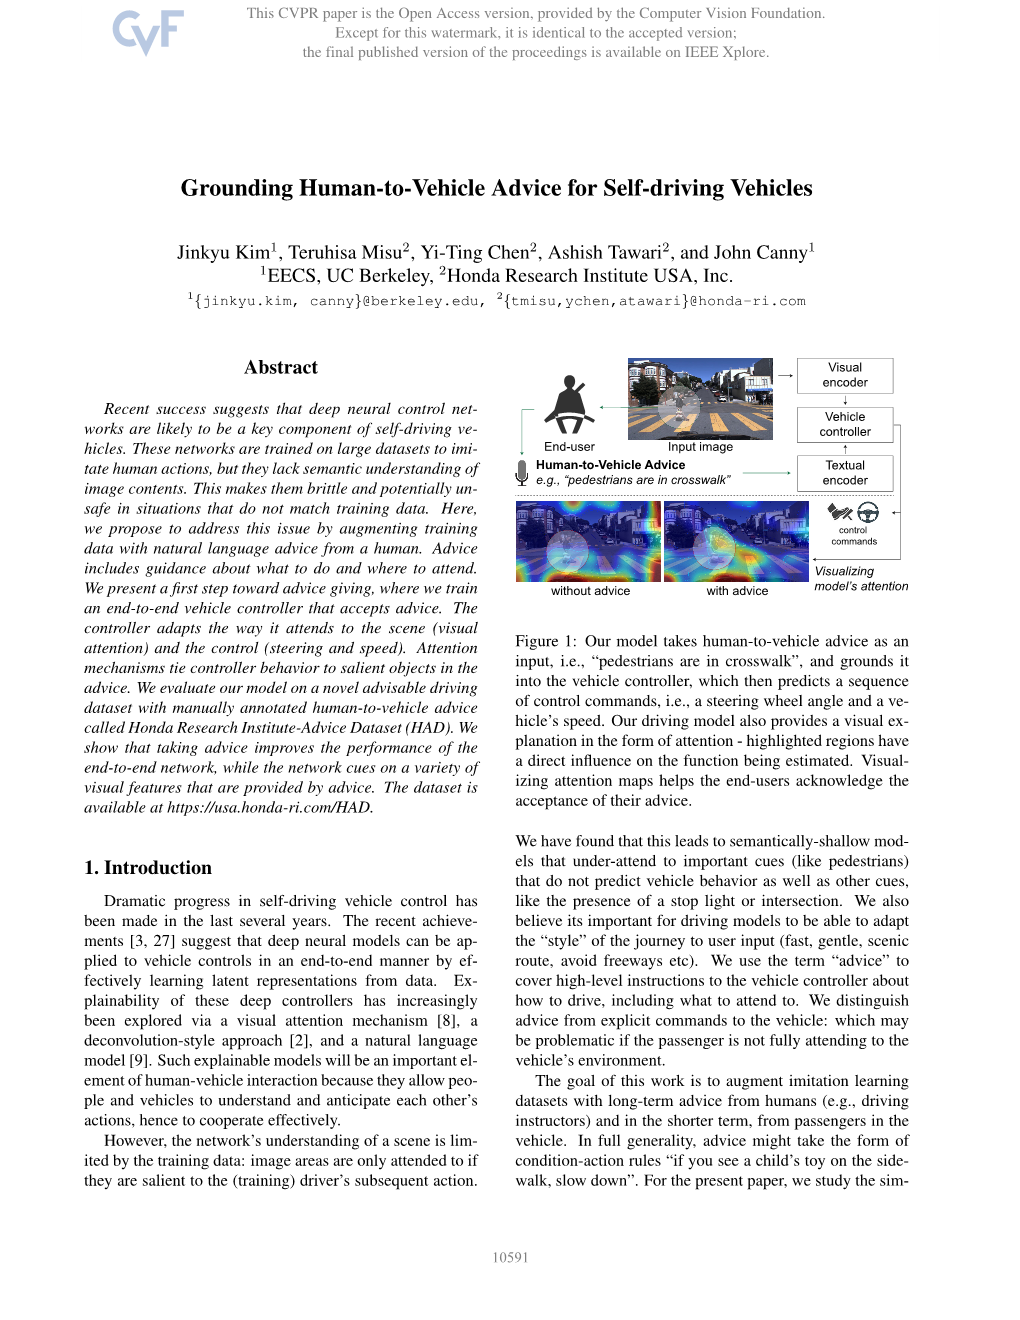 Grounding Human-To-Vehicle Advice for Self-Driving Vehicles